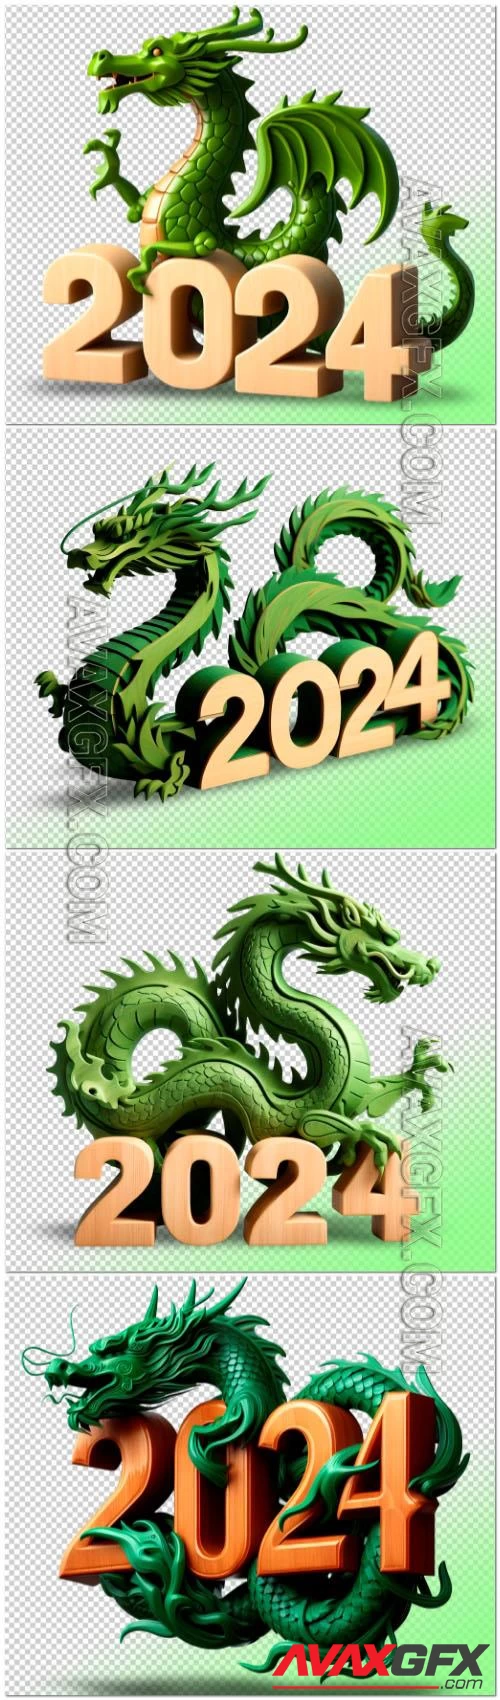 Psd symbol of year 2024 green wooden dragon